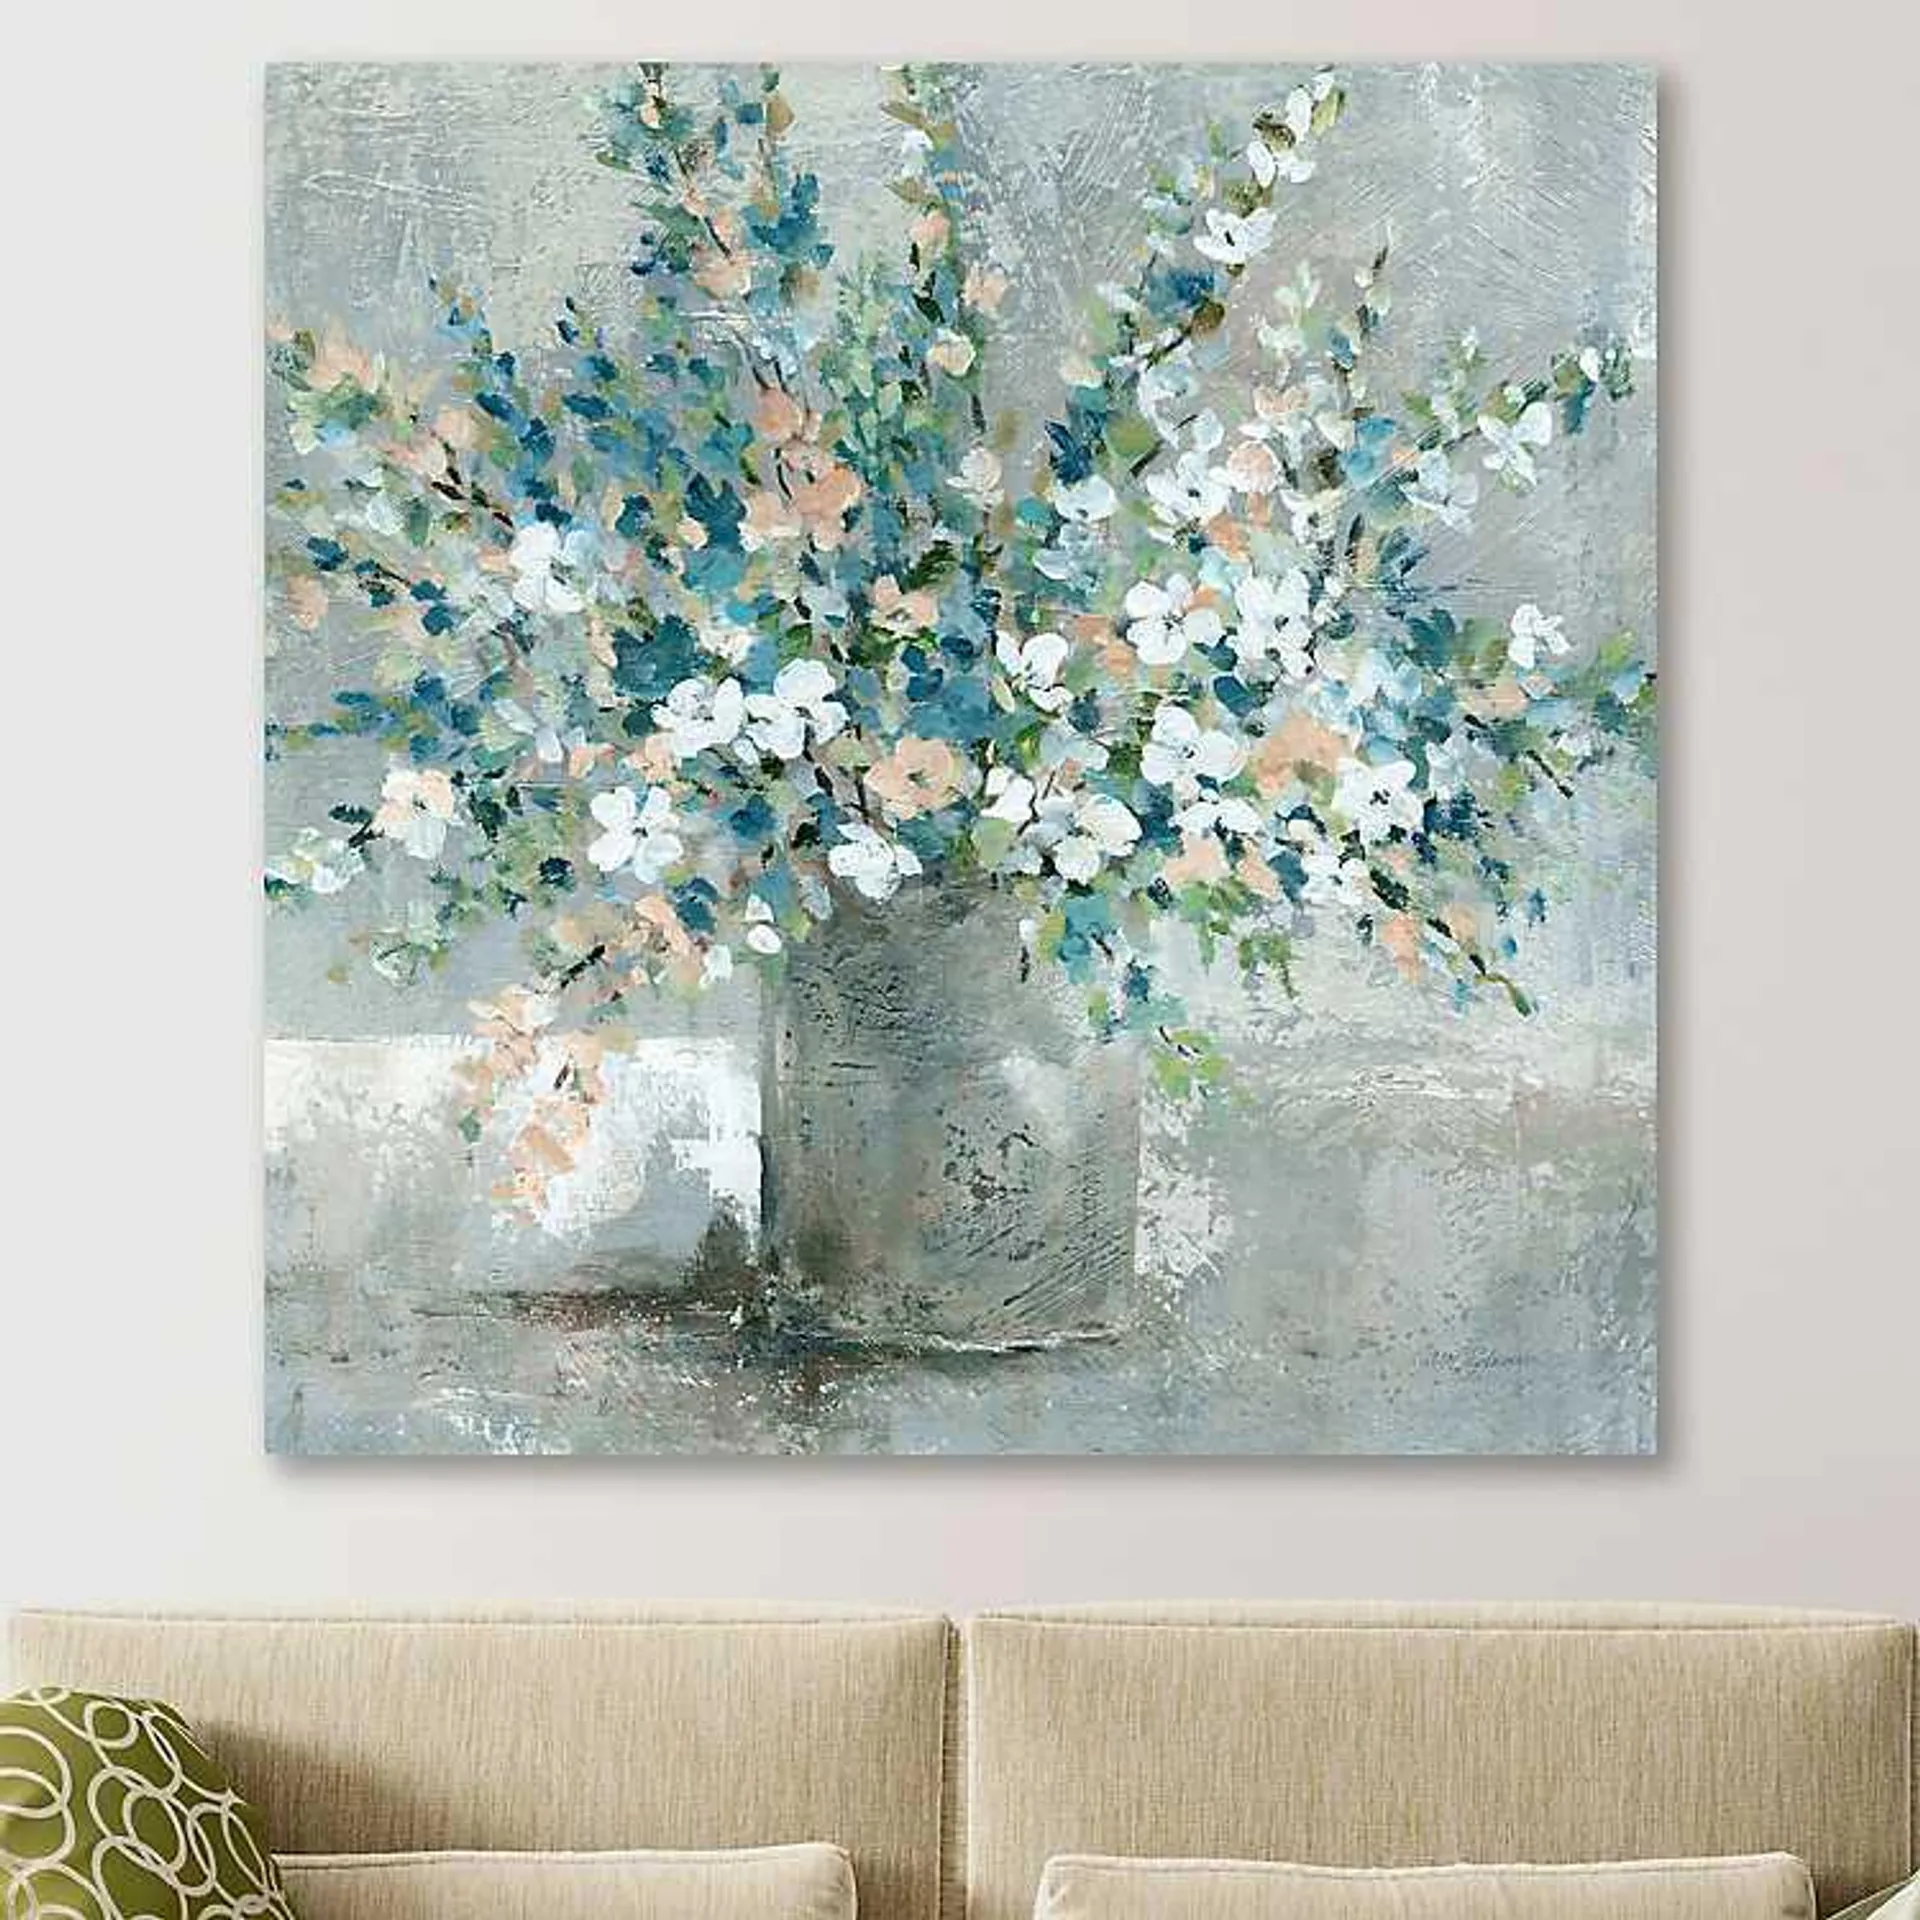 Gathered From The Farm Giclee Canvas Art Print